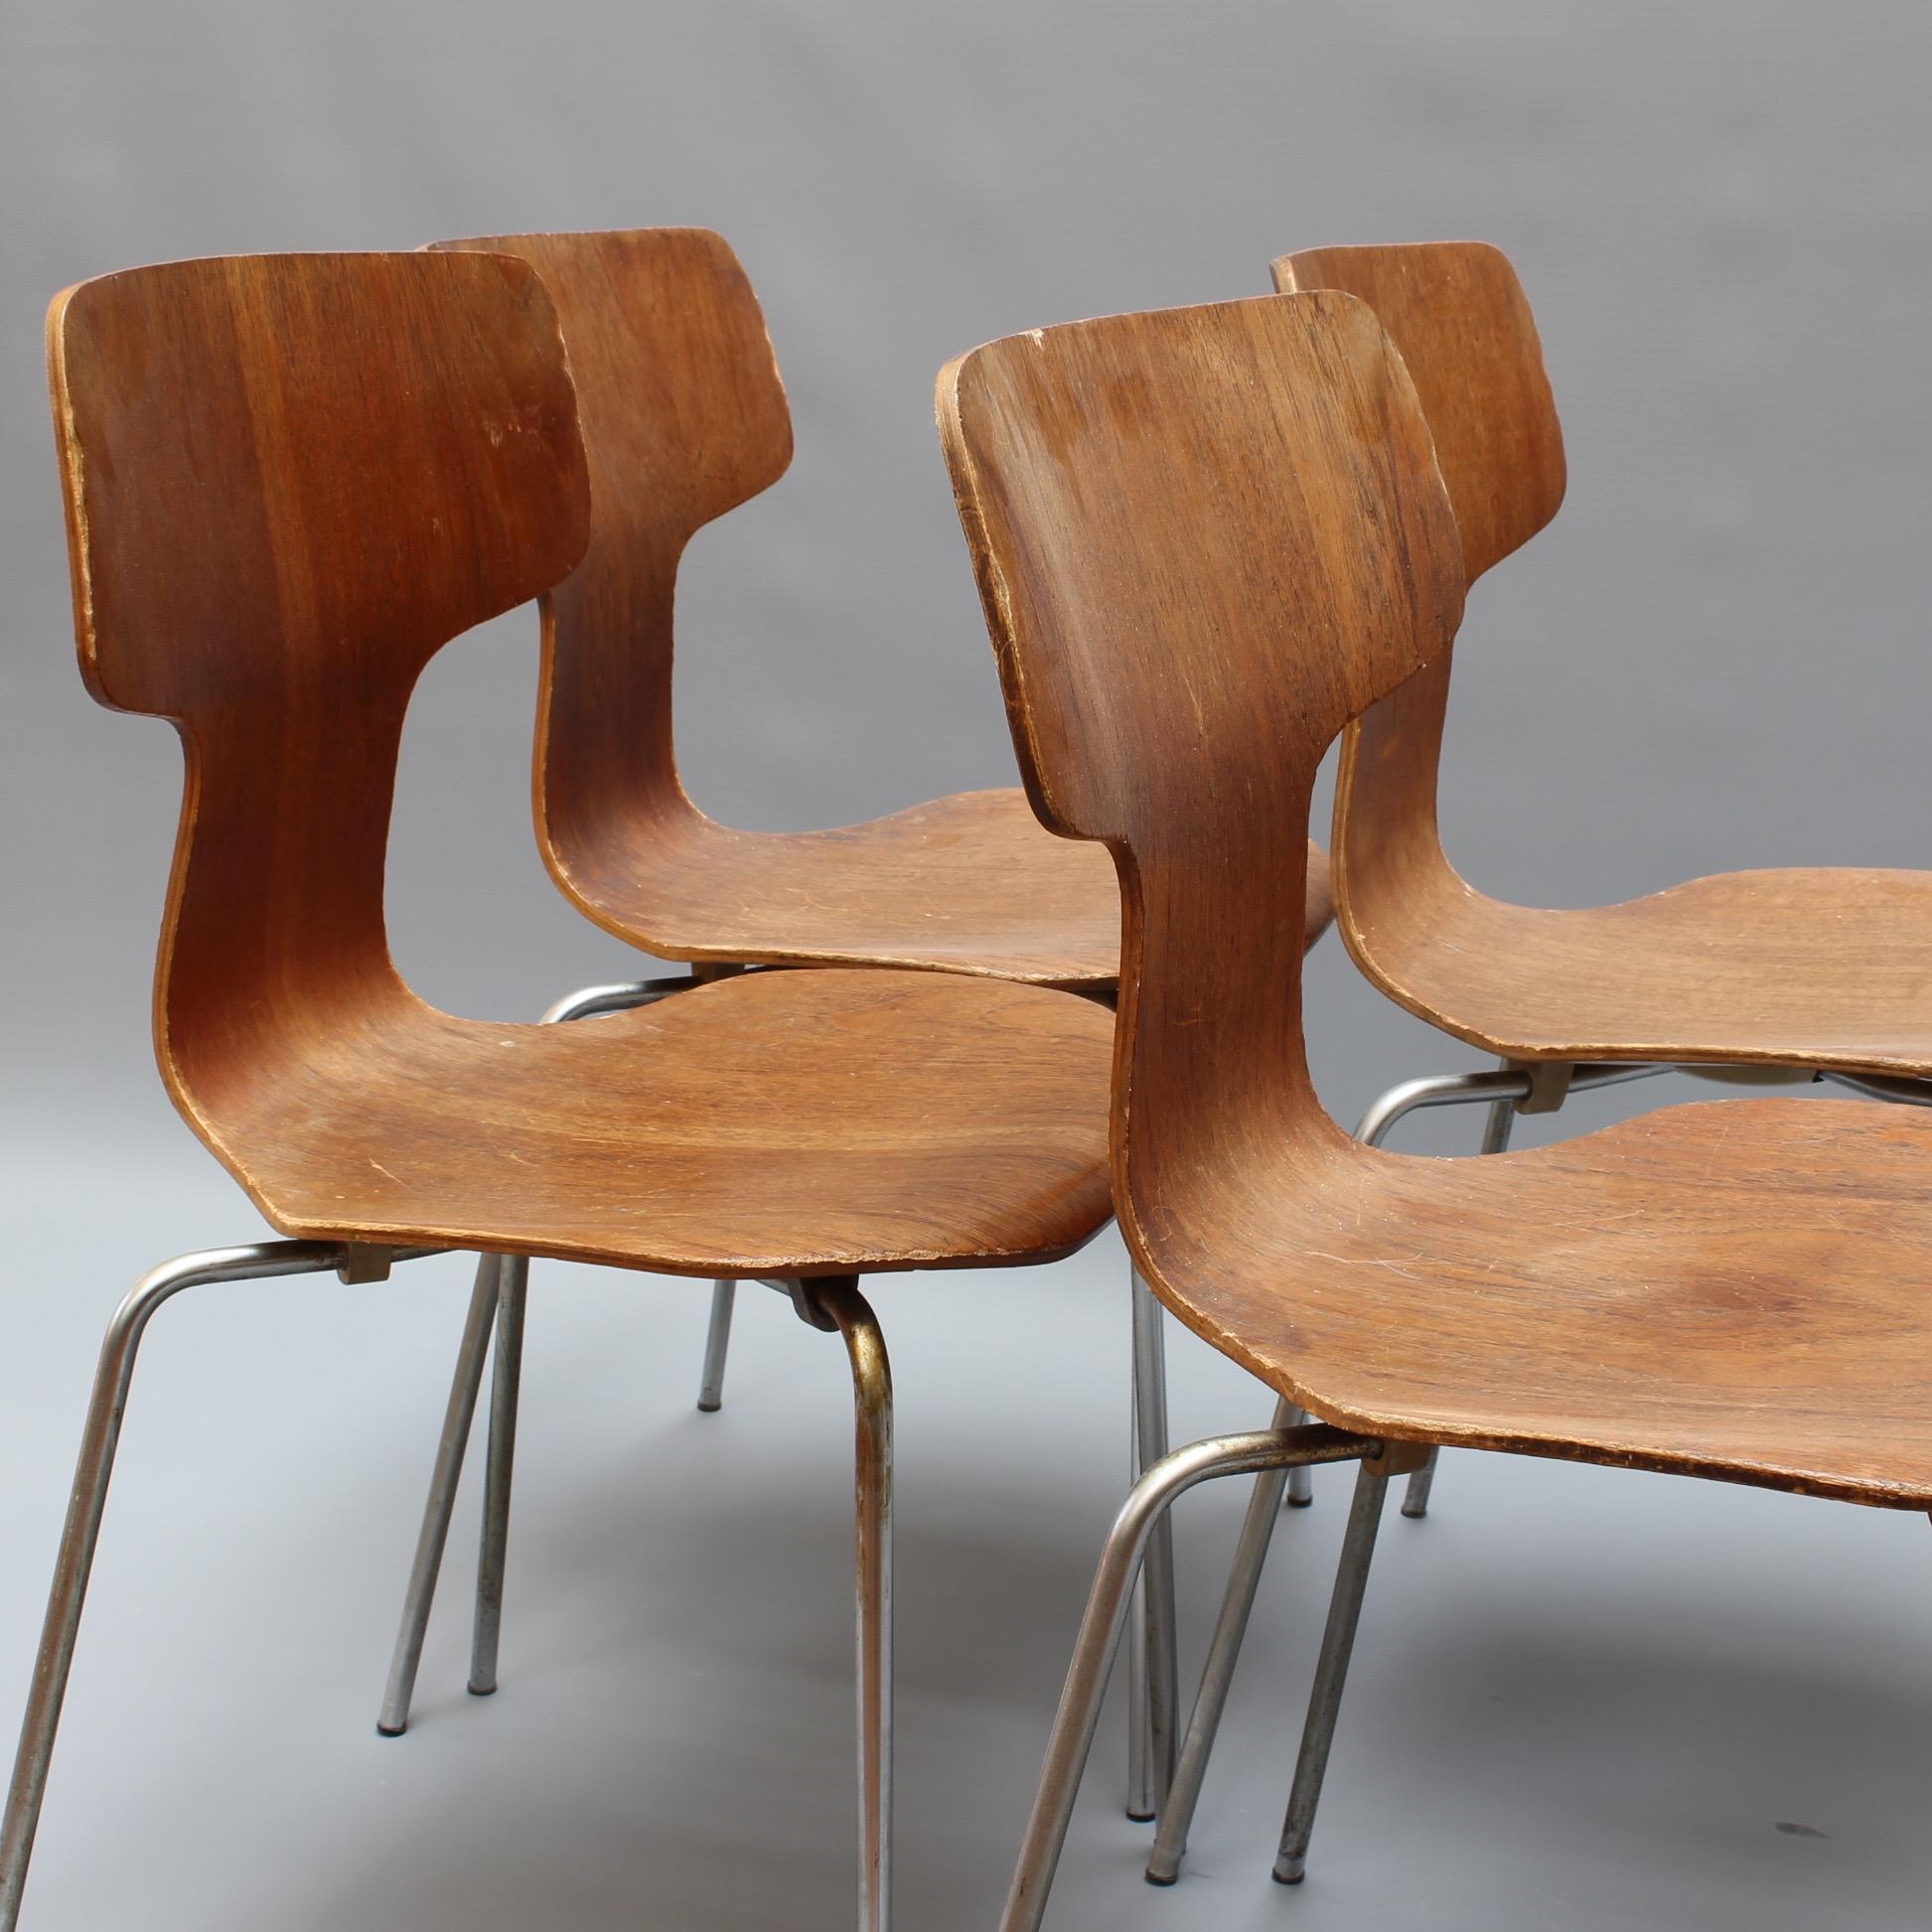 Mid-20th Century Set of Four Type 3103 Chairs by Arne Jacobsen for Fritz Hansen, 1969